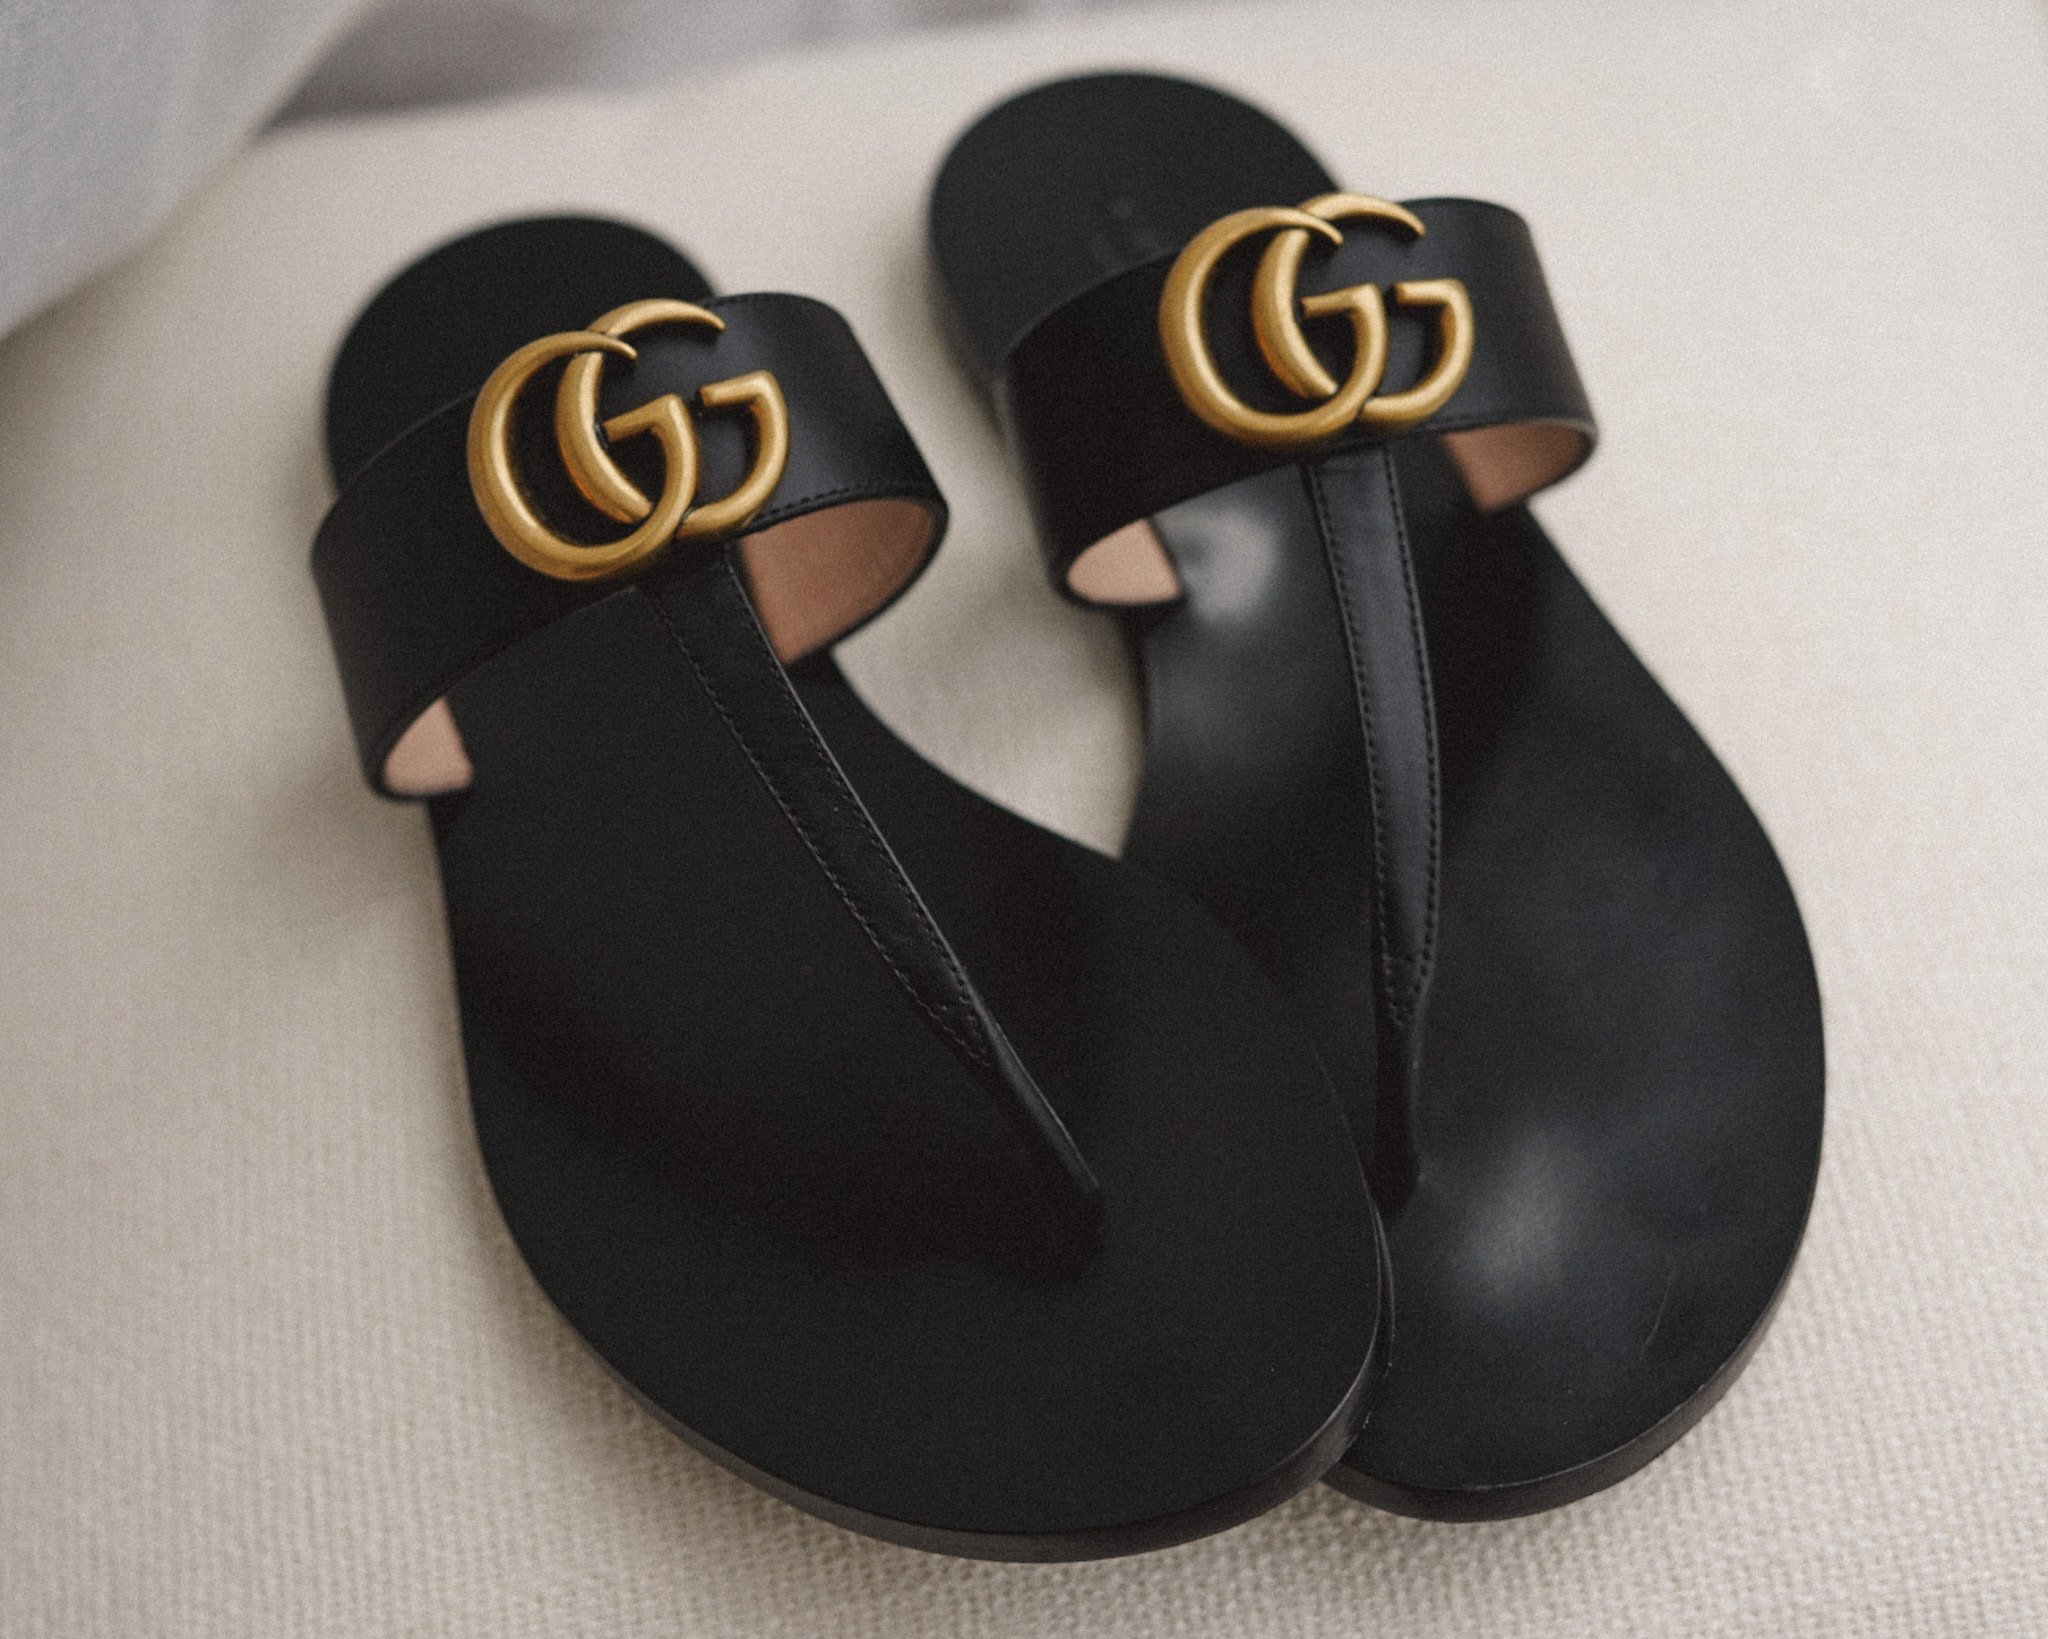 Gucci Double G Thong Sandal Review | Fit, Price, Styling and more! |  Jessica Ashley